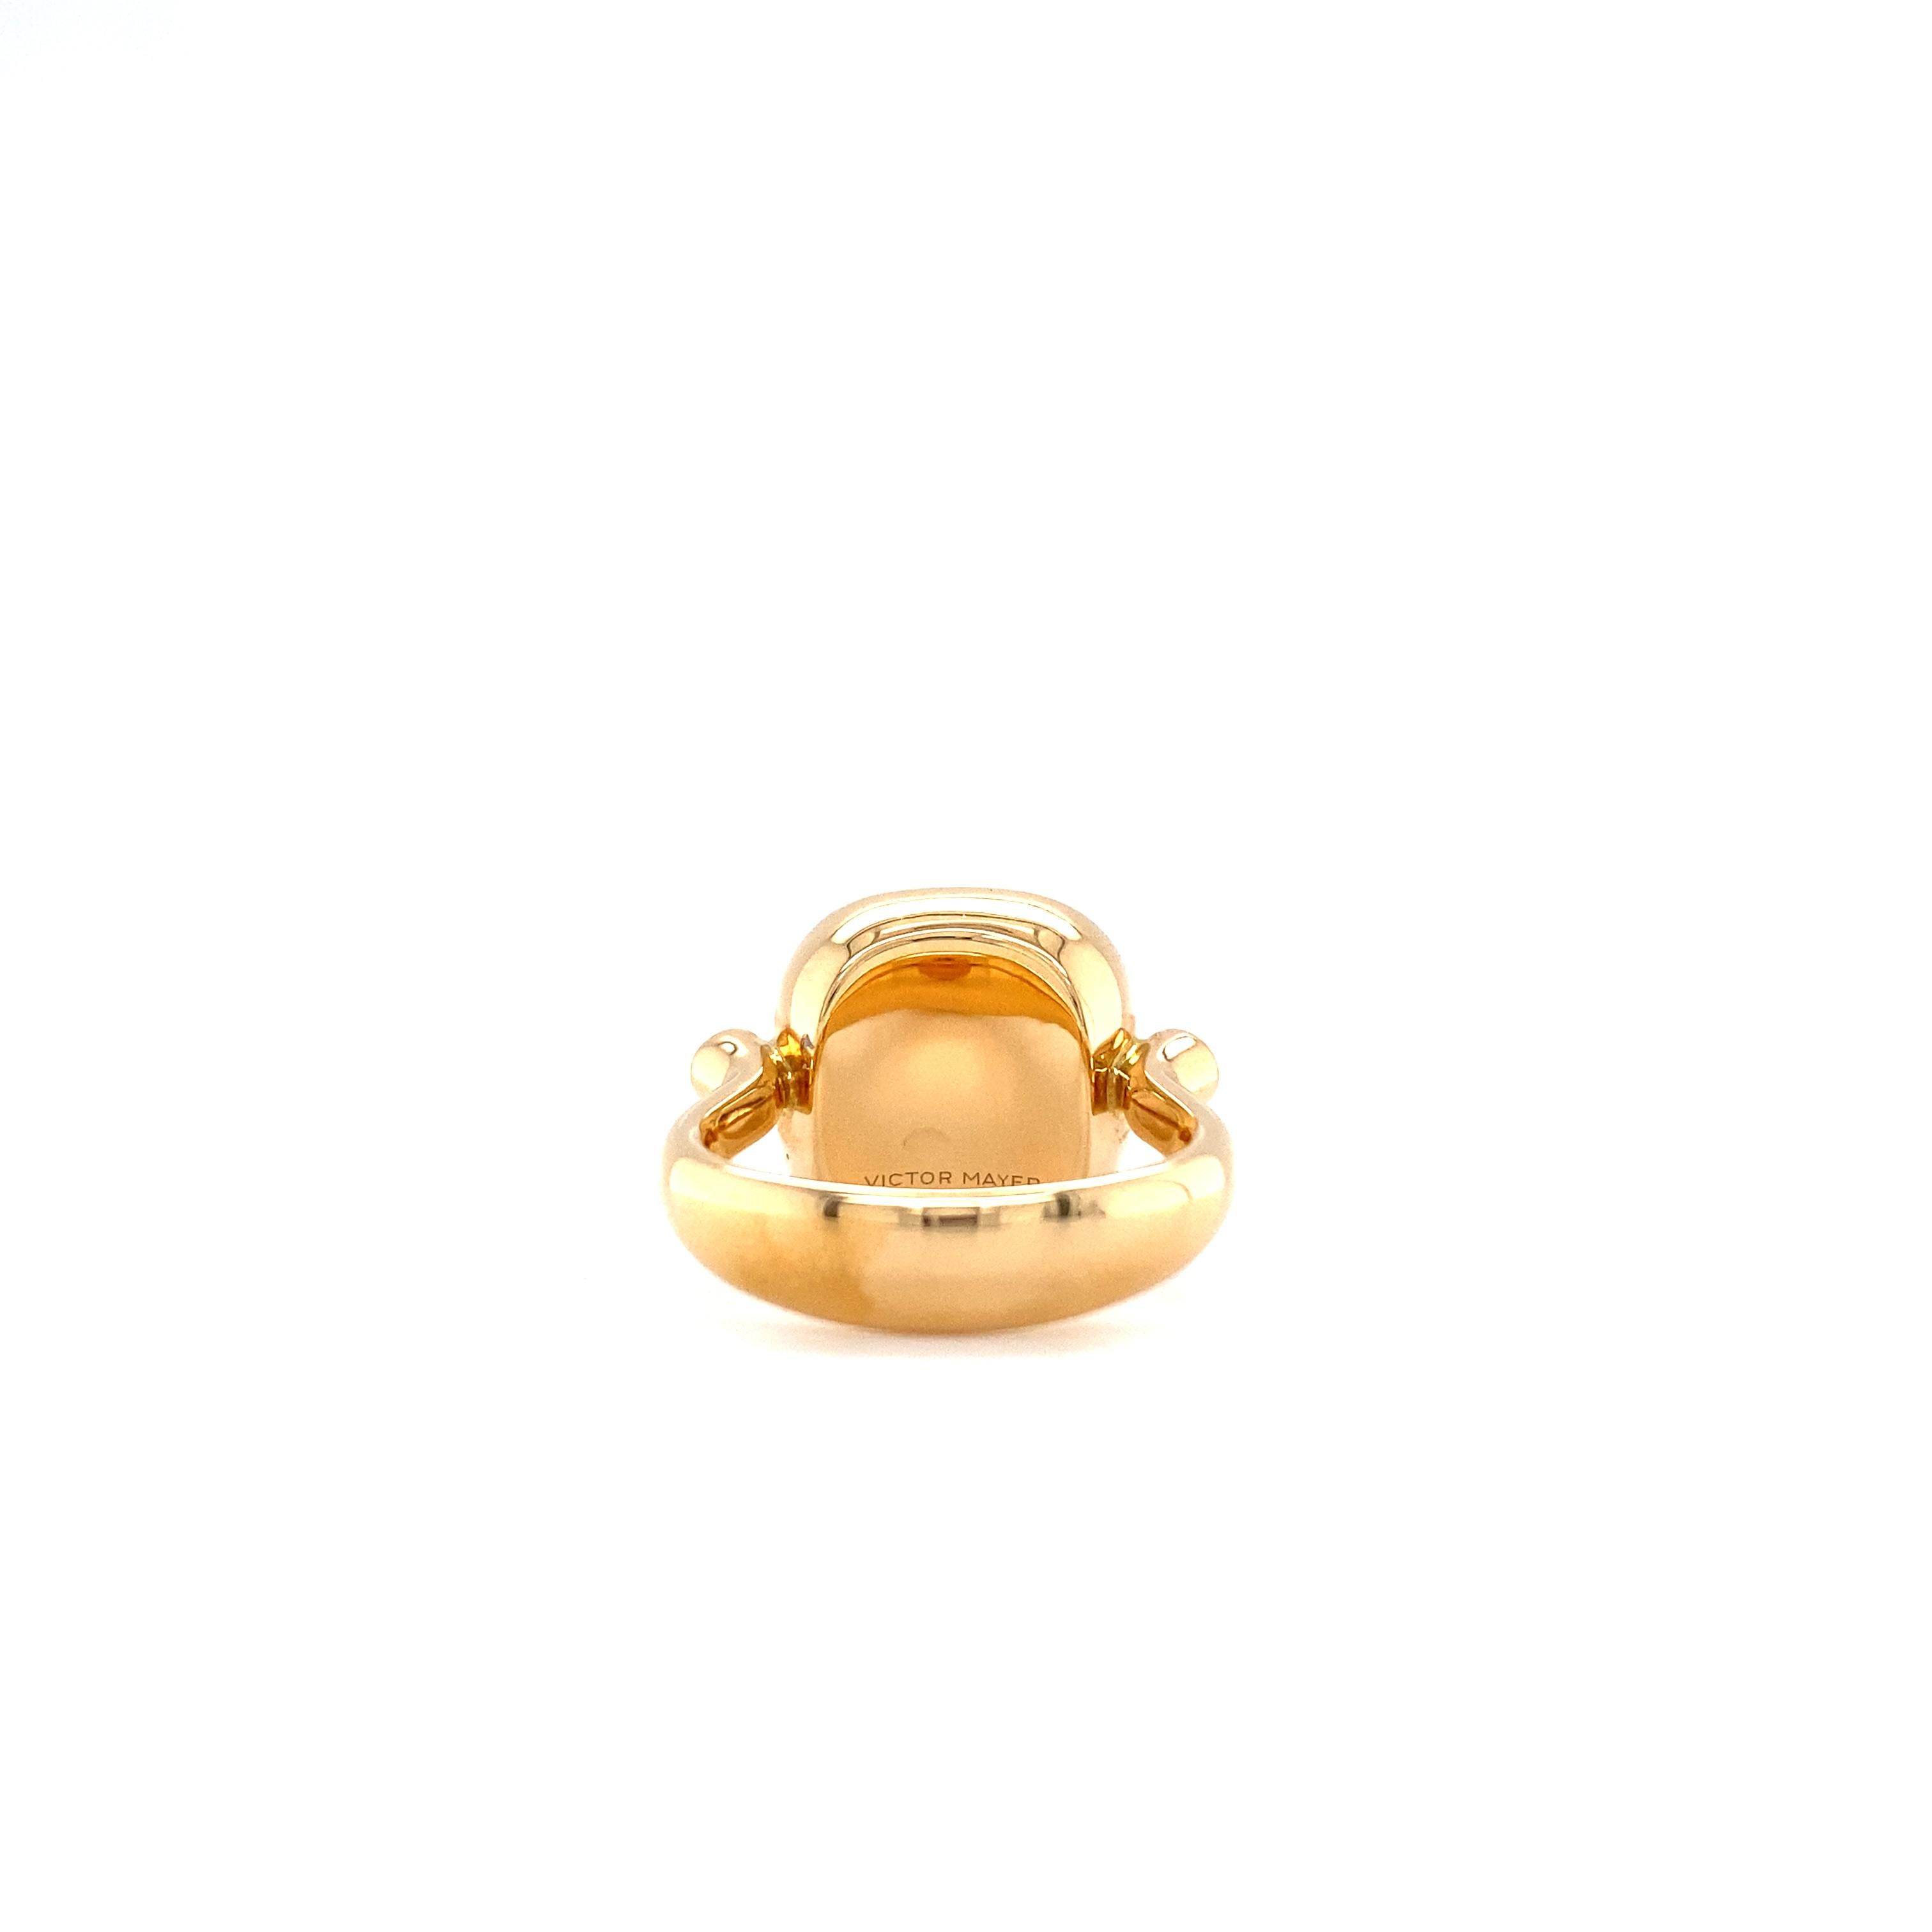 Contemporary Victor Mayer Era Rose Quartz Ring in 18k Rose Gold with 26 Diamonds For Sale